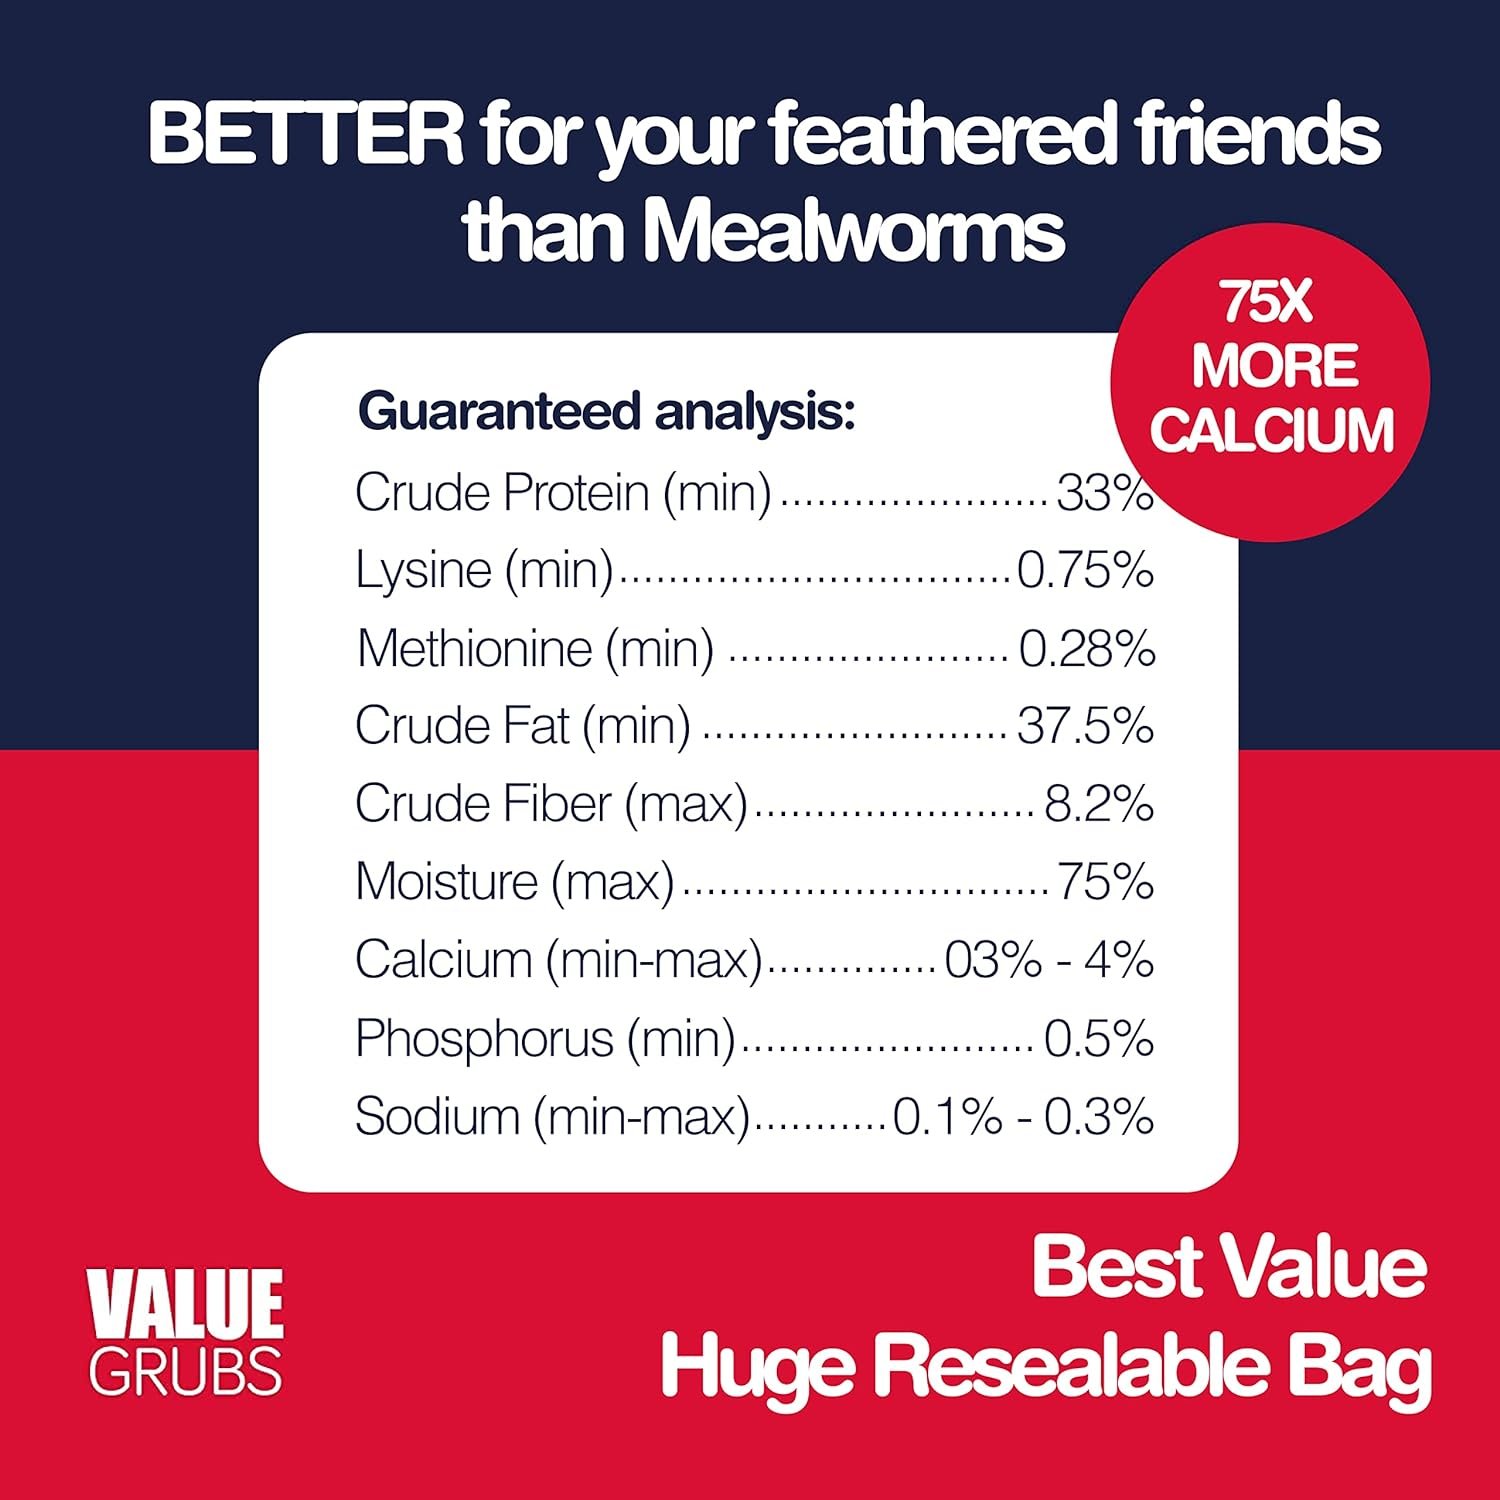 Value Grubs 4 lbs - Better Than Dried Mealworms for Chickens - Non-GMO - 75X More Calcium Than Meal Worms - Poultry Feed Molting Supplement - Black Solider Fly Larvae Treats for Hens Ducks Wild Birds